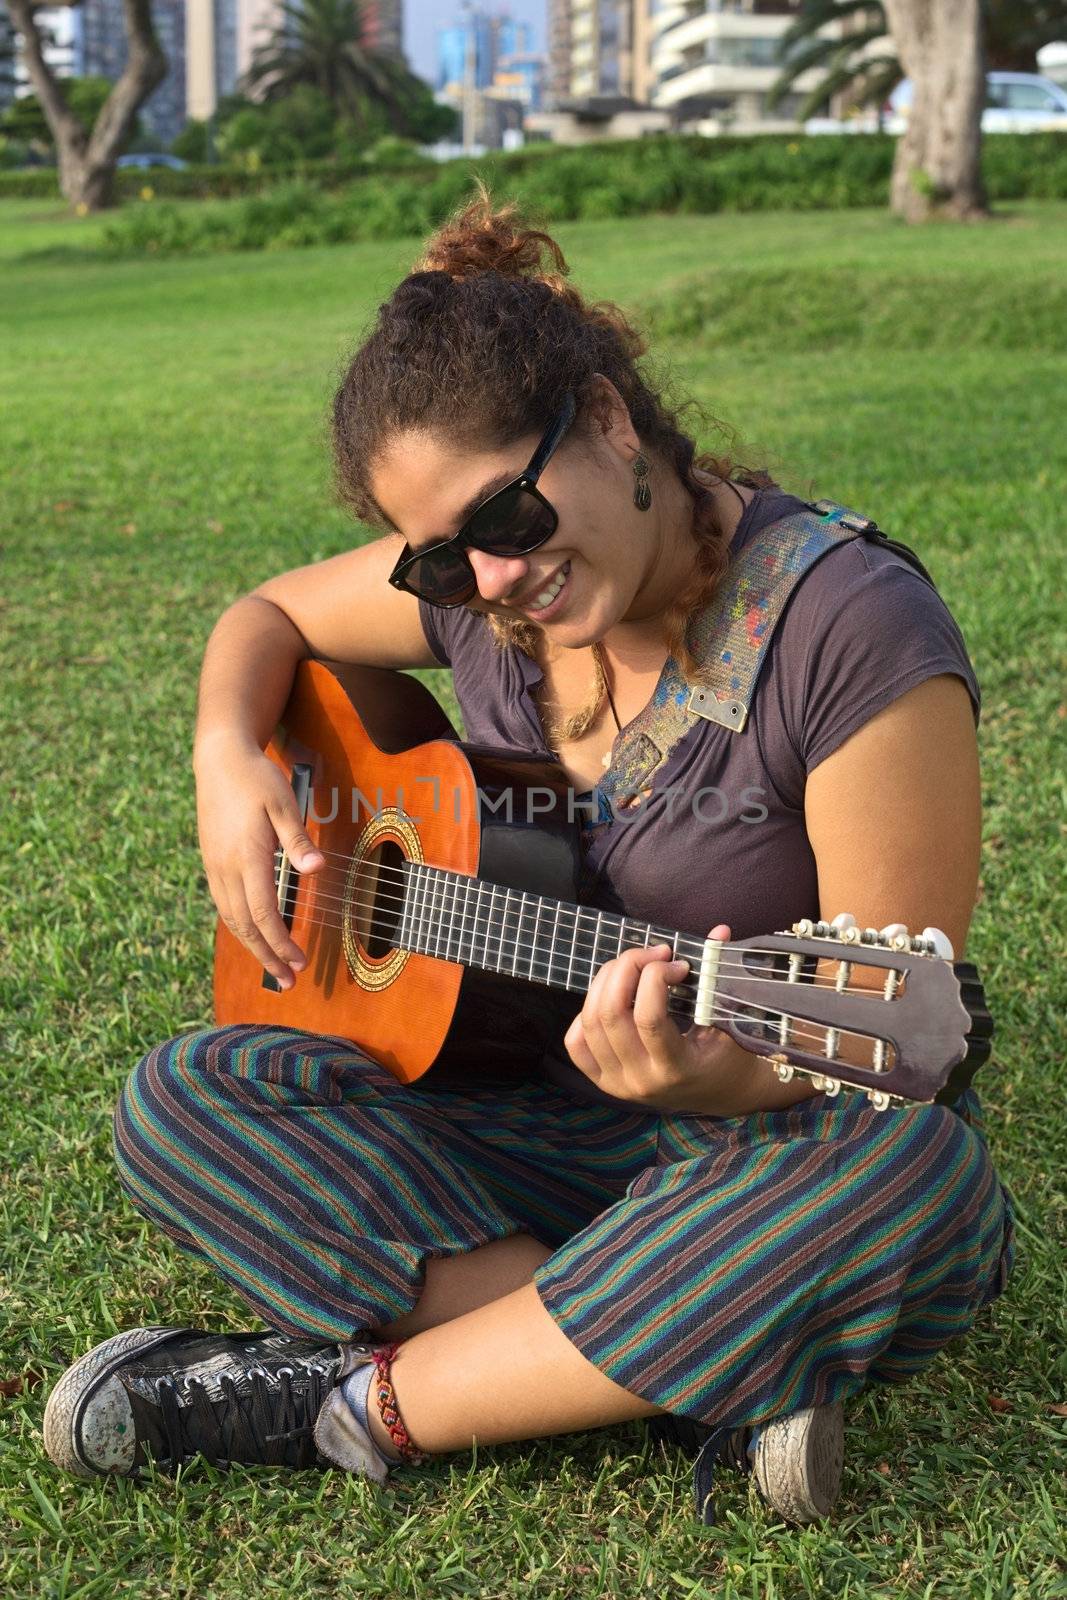 Beautiful smiling young Peruvian woman playing the guitar in a park (Selective Focus, Focus on the face of the woman)